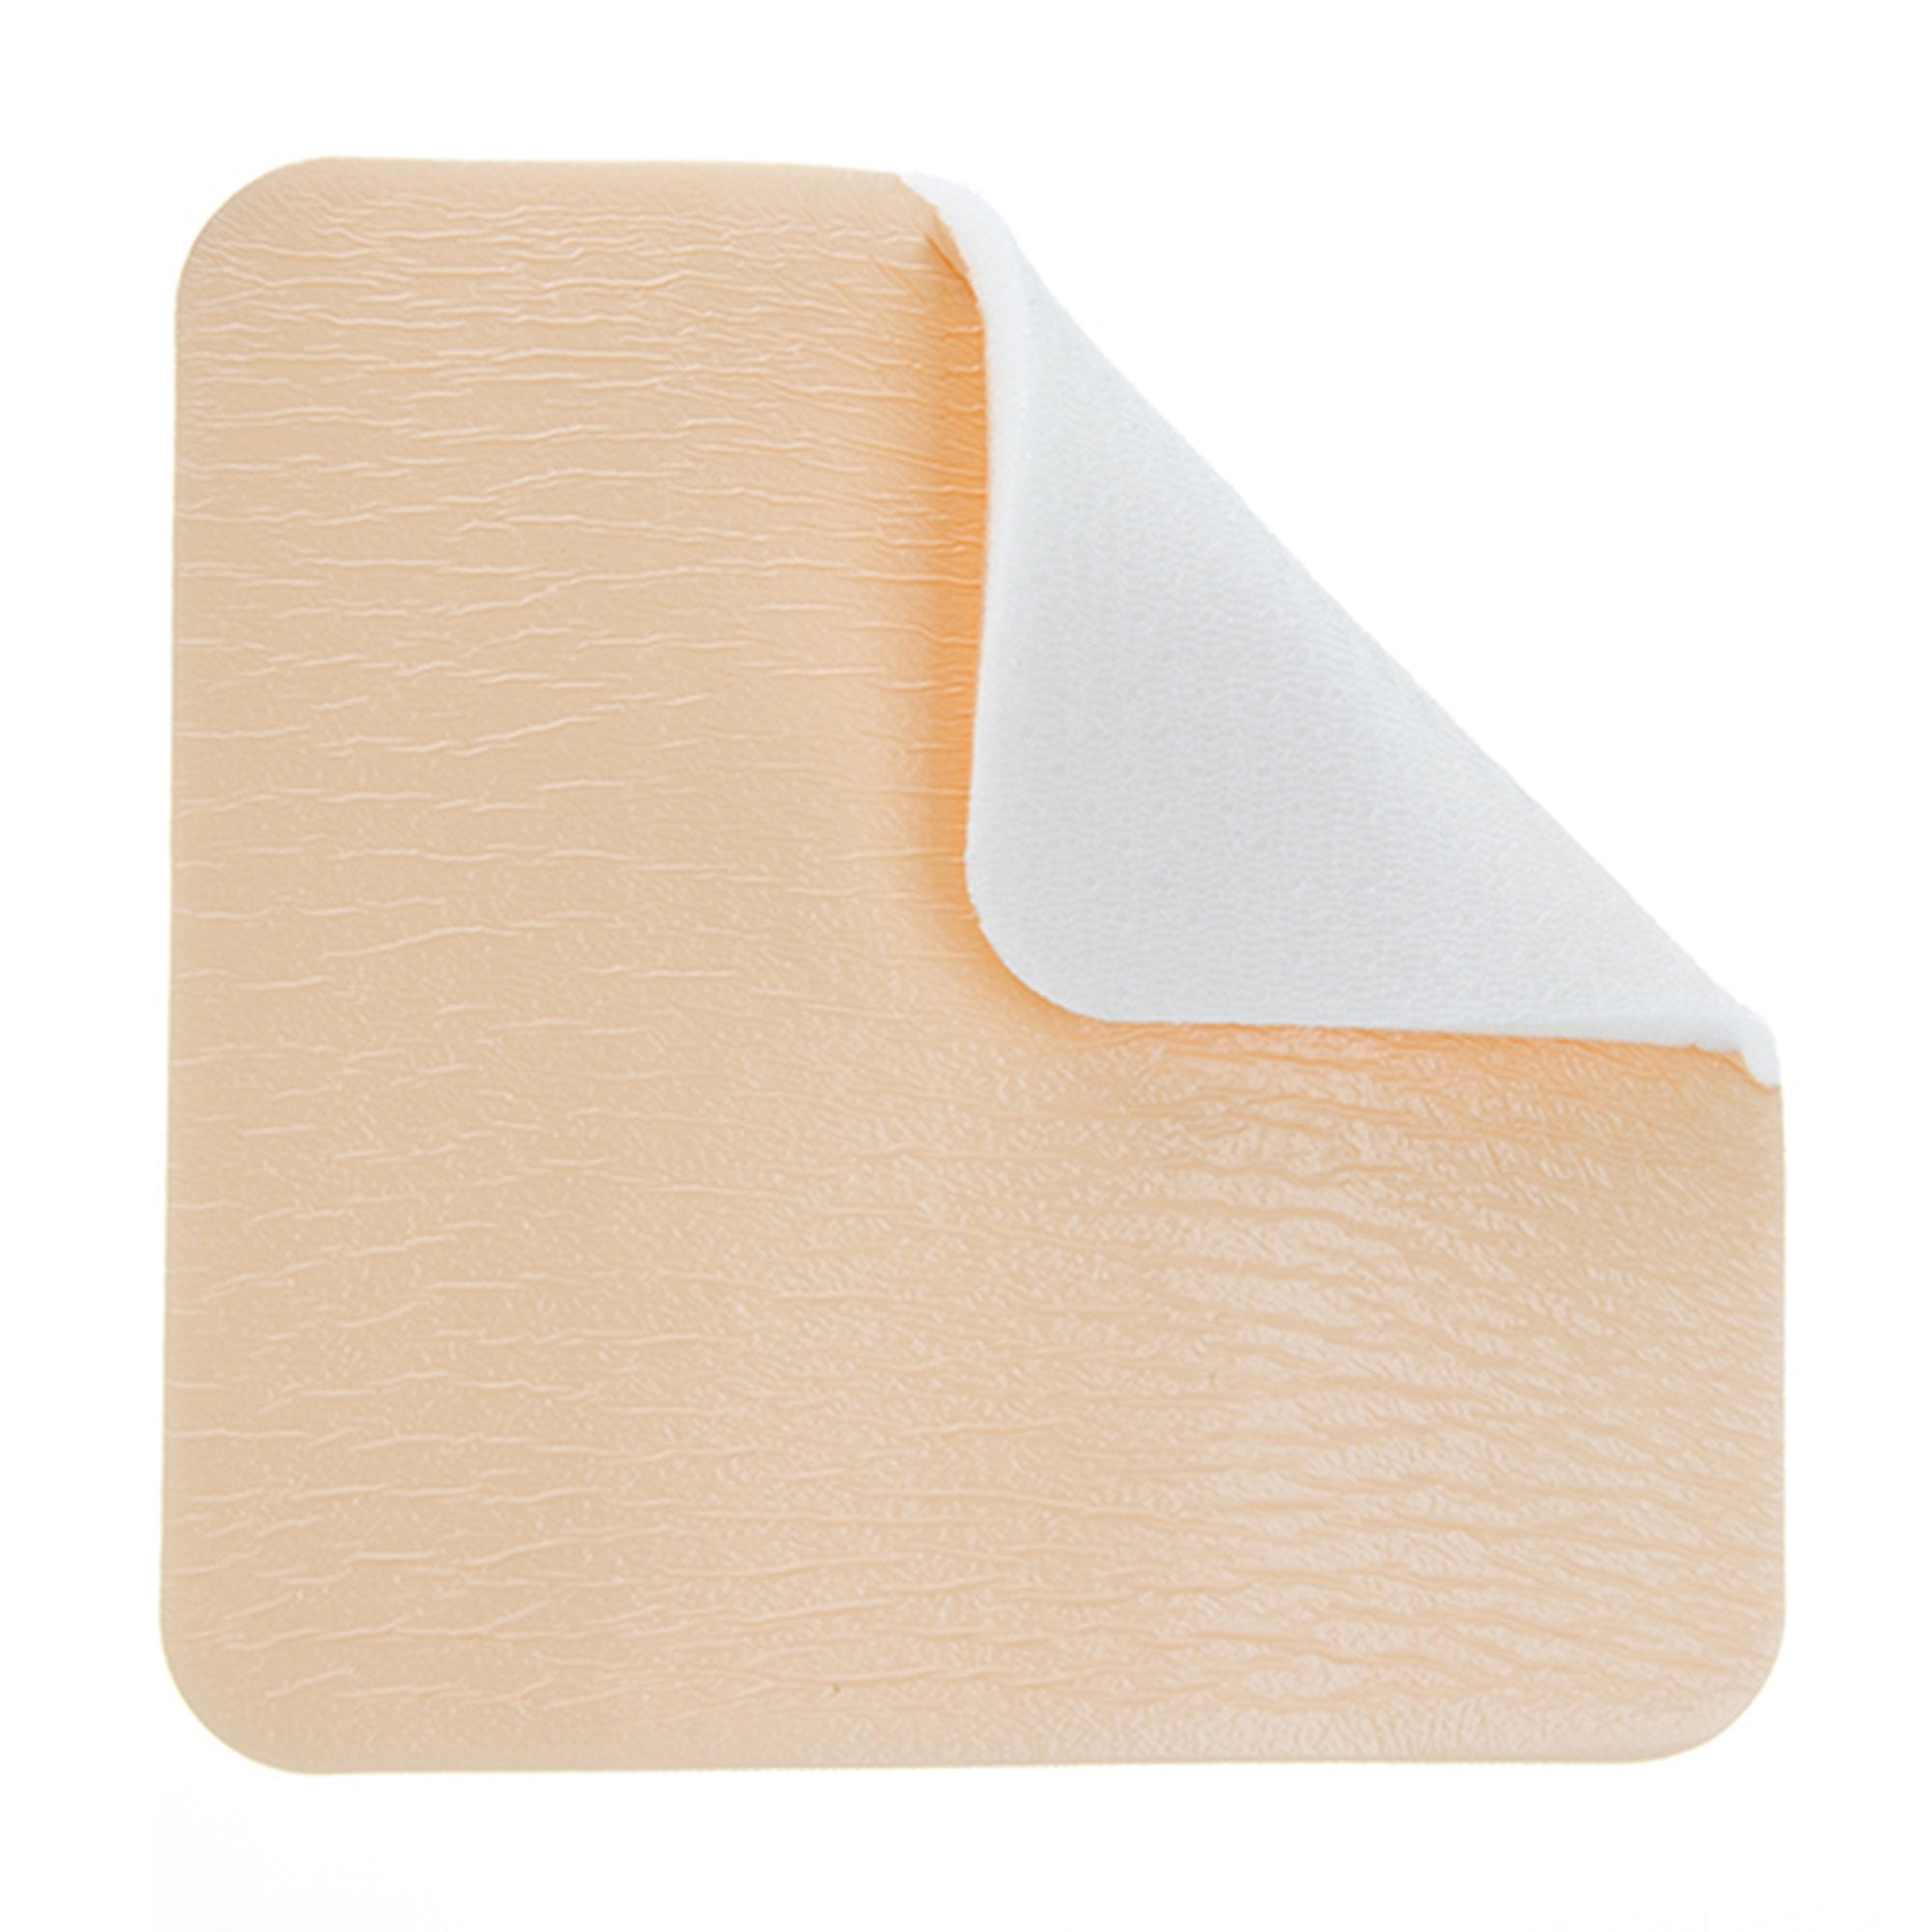 Foam Dressing ComfortFoam™ 4 X 8 Inch Without Border Film Backing Silicone Face Rectangle Sterile